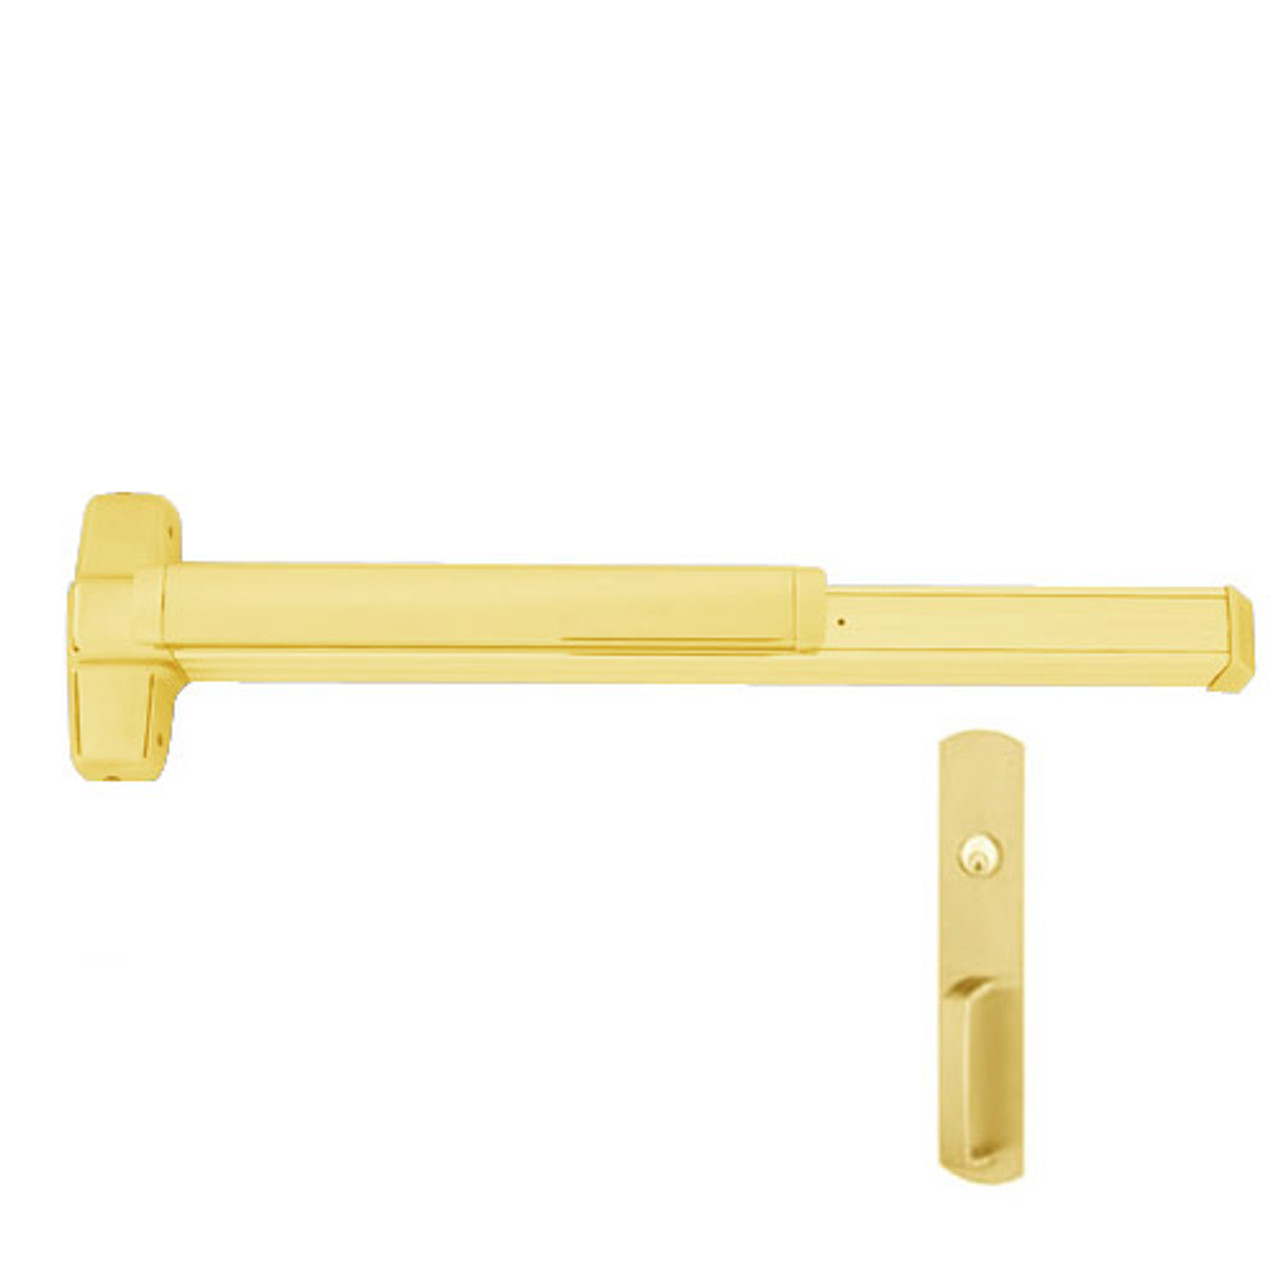 EL9847WDC-NL-US3-4 Von Duprin Exit Device with Electric Latch Retraction in Bright Brass